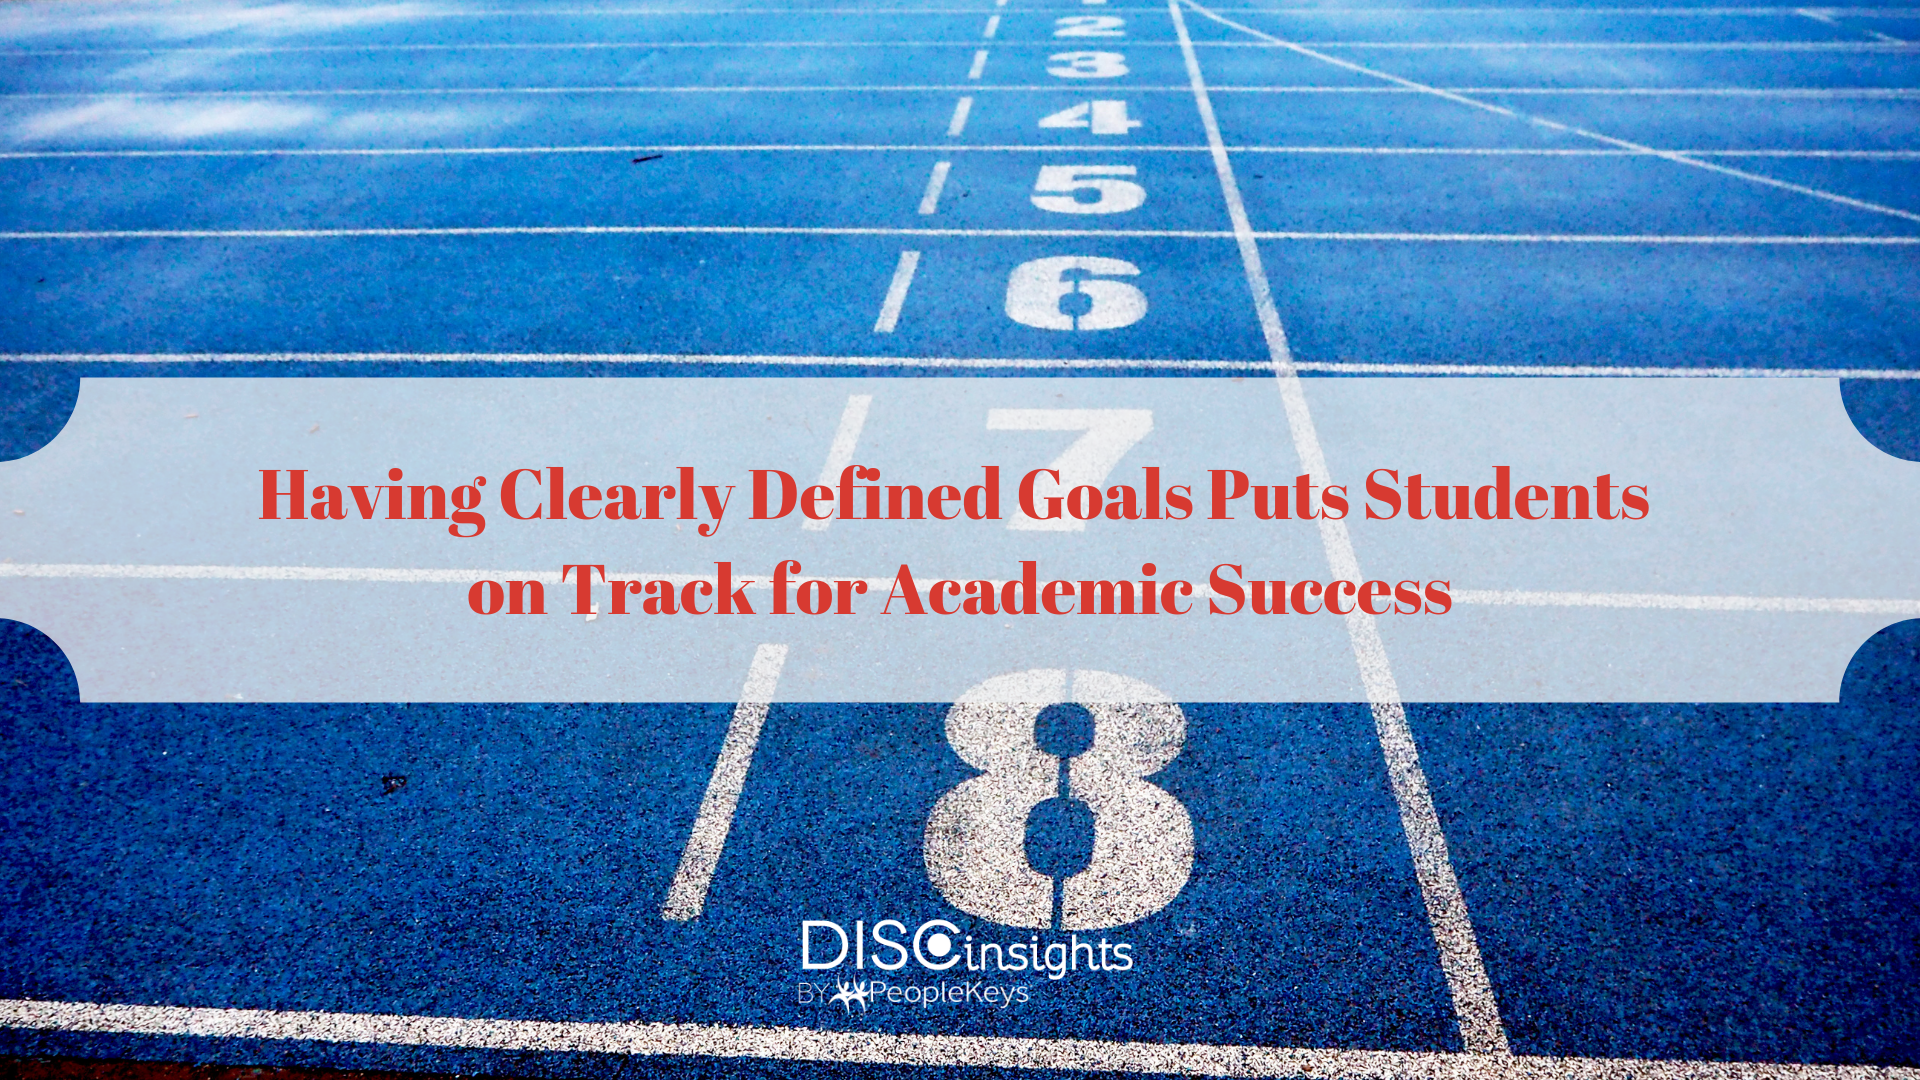 Having Clearly Defined Goals Puts Students on Track for Academic Success